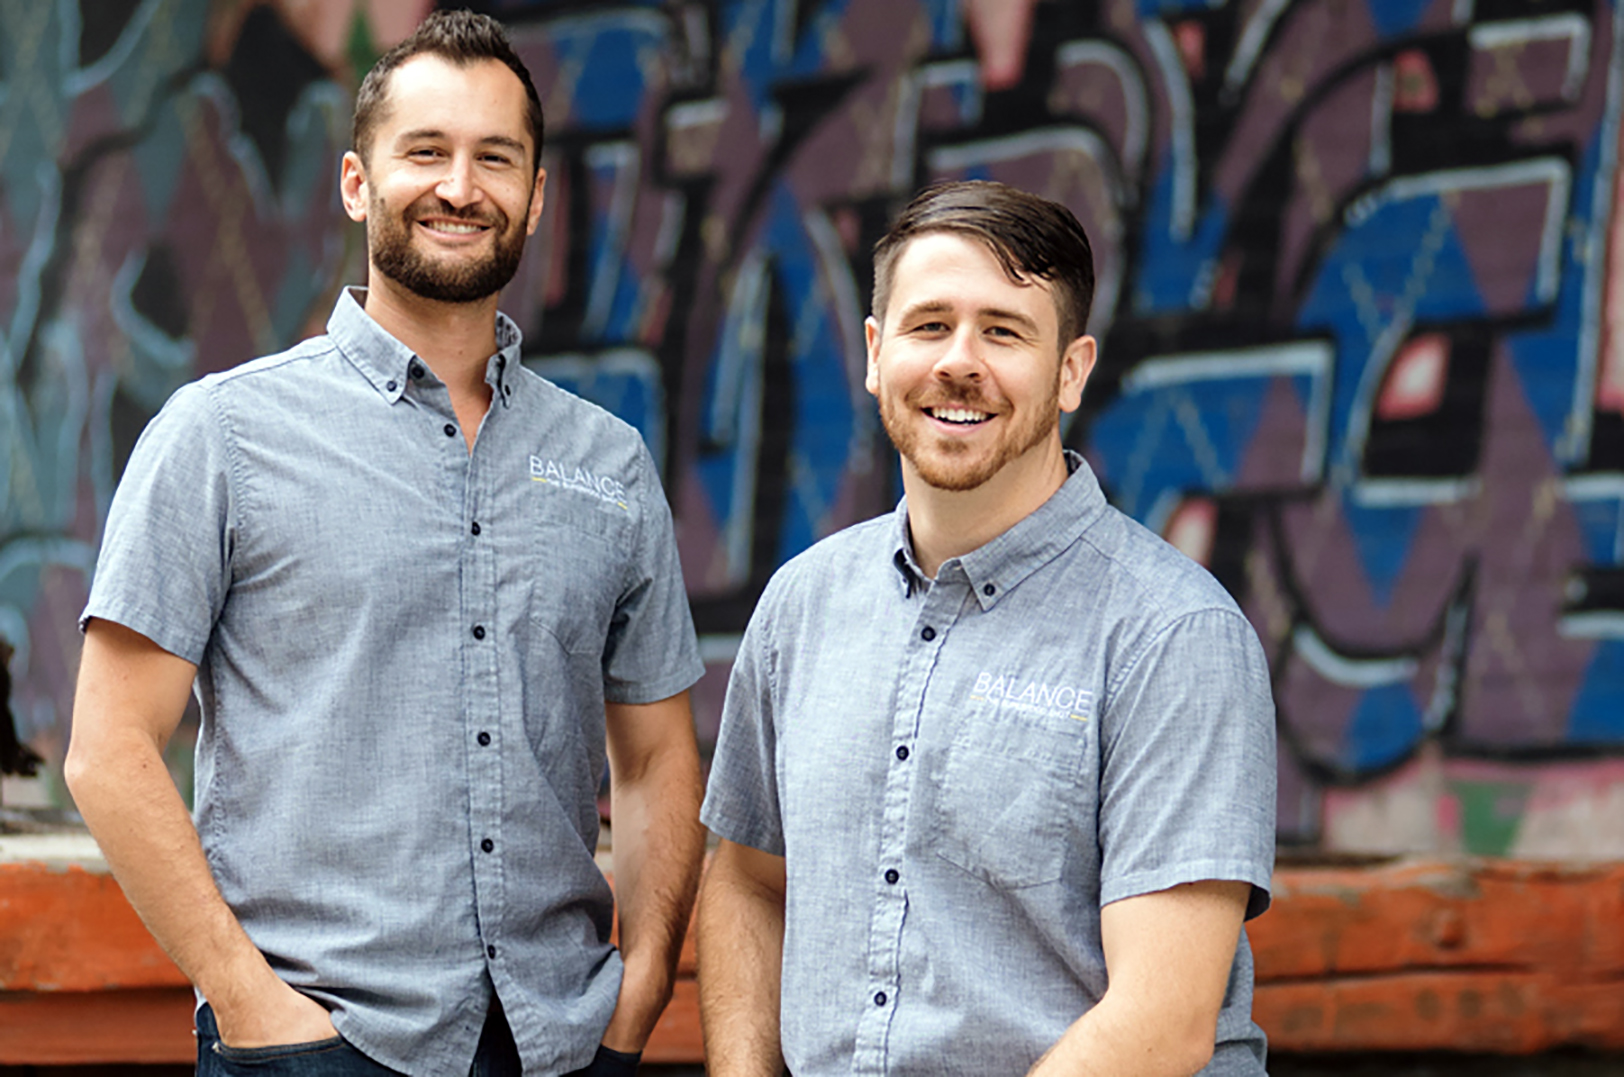 2019 Startups to Watch: Life Equals shakes up wellness space with the Superfood Shot